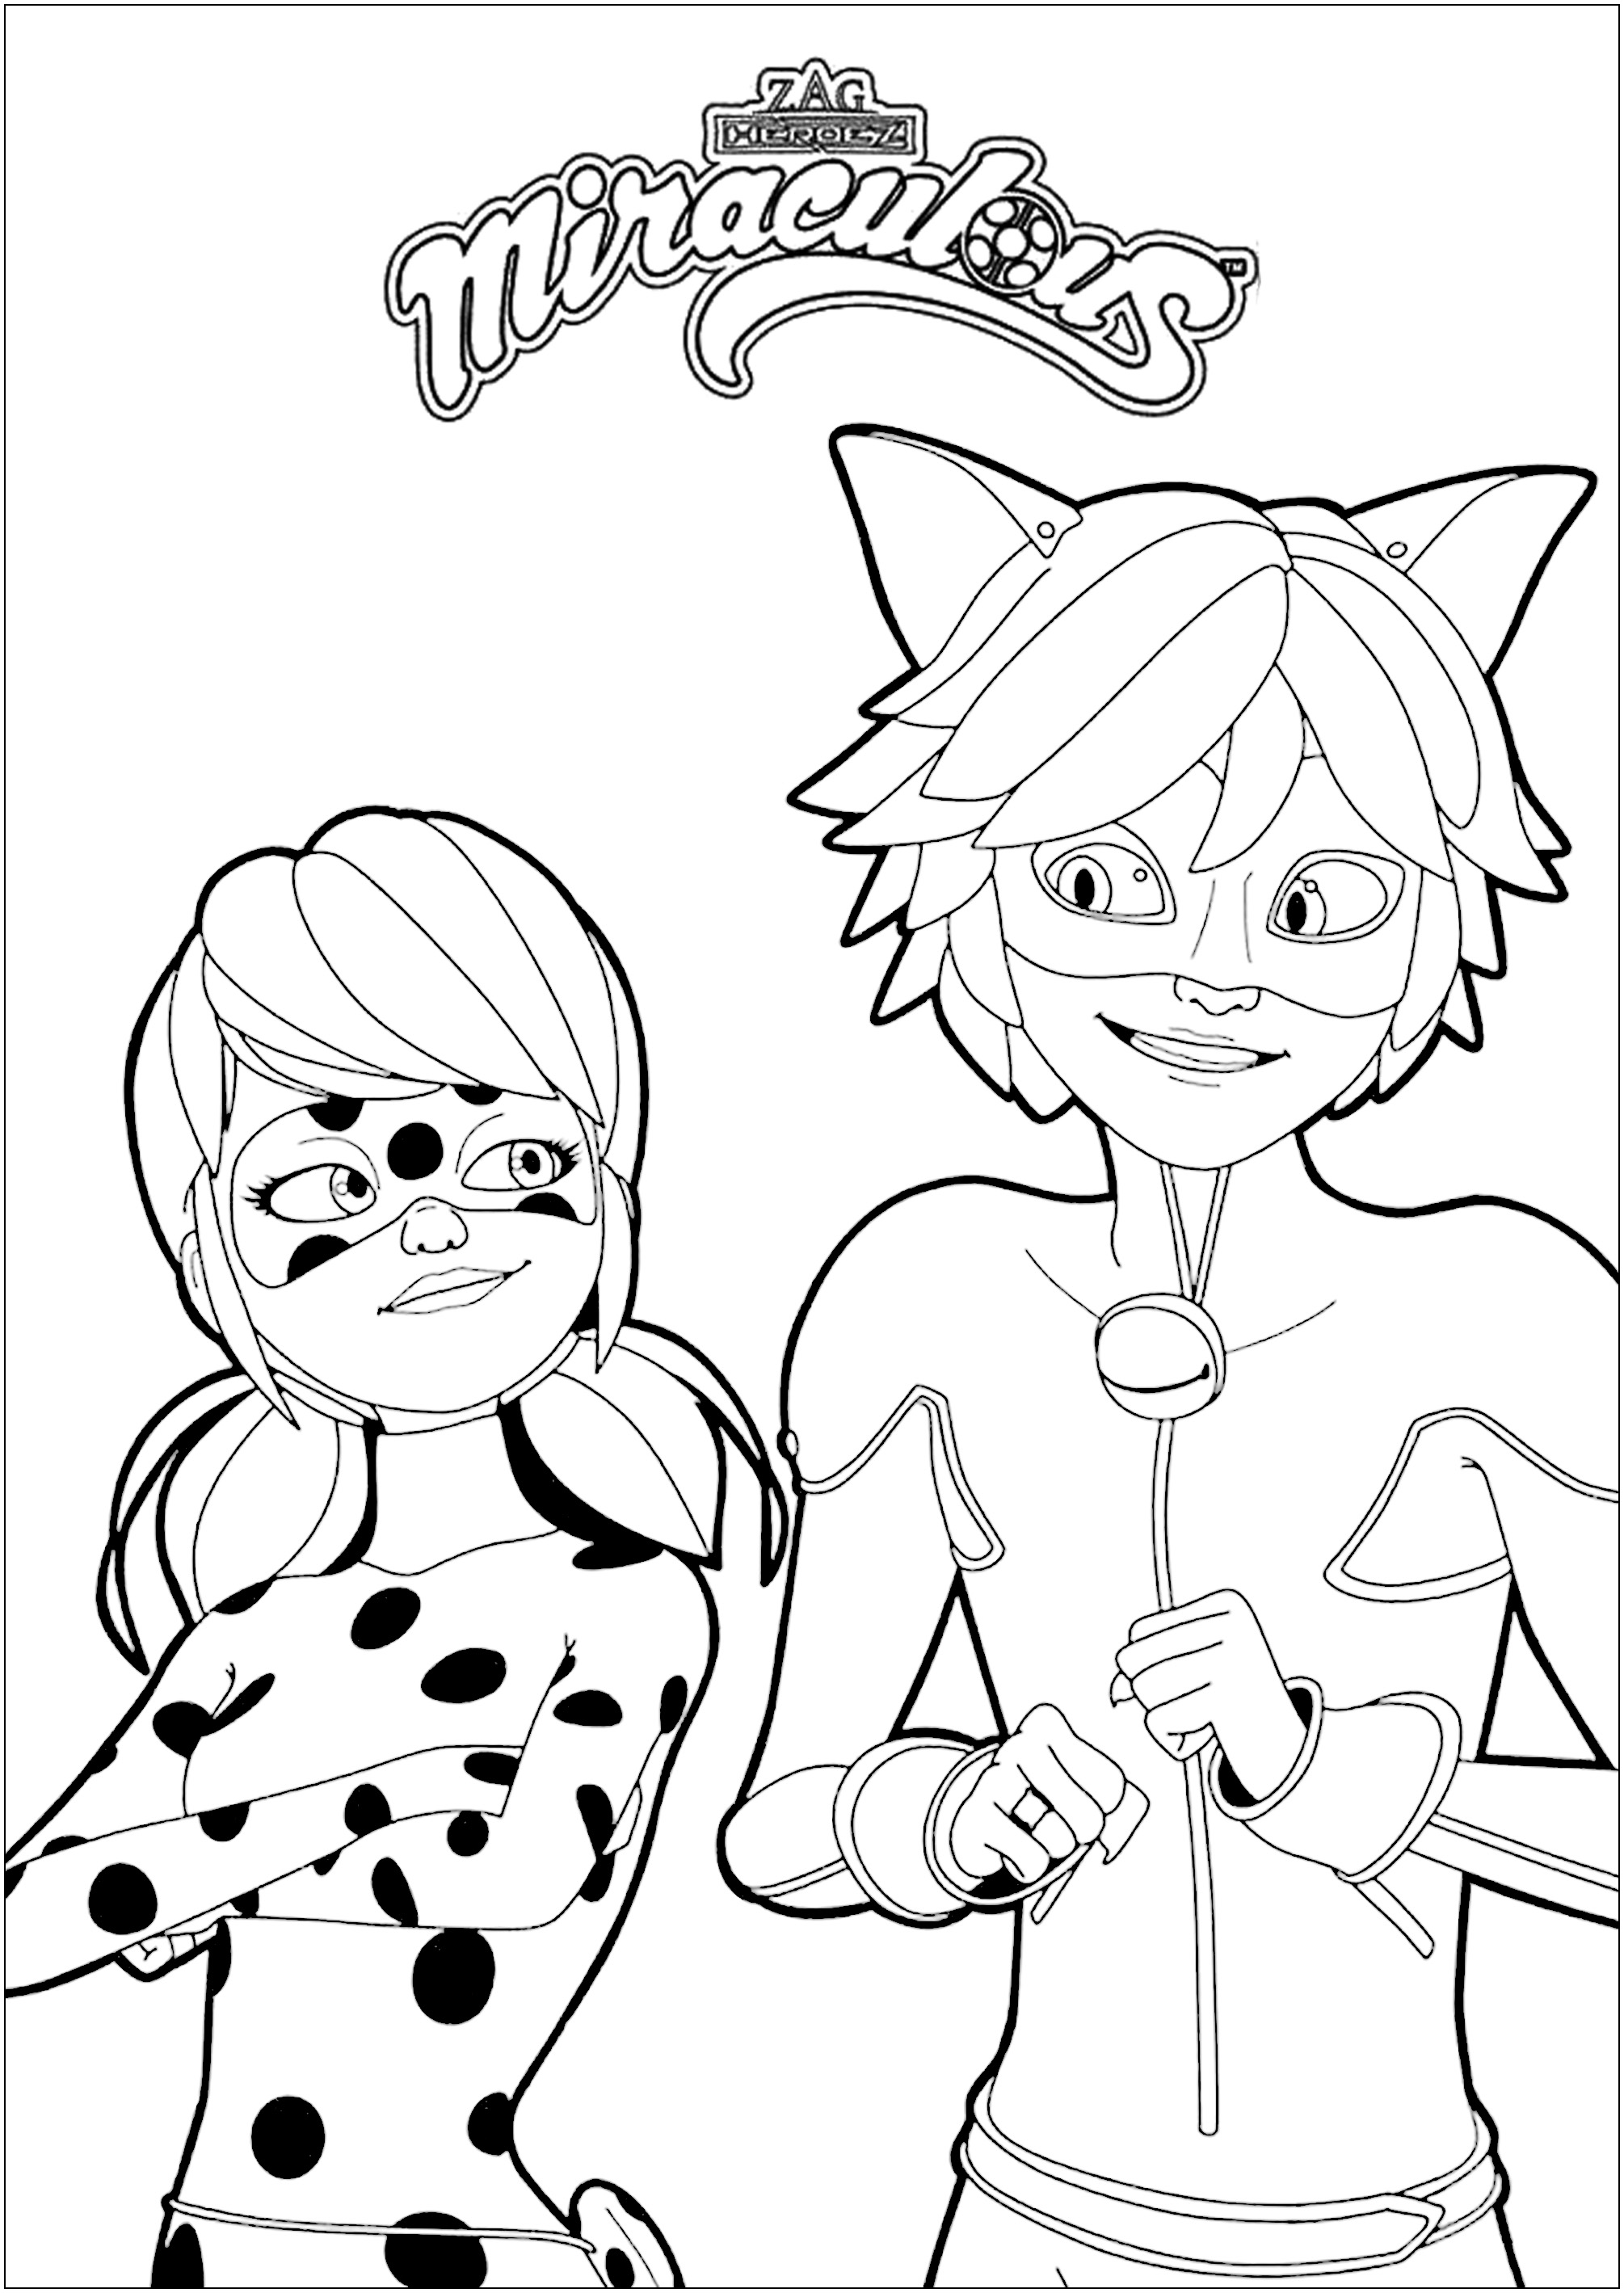 Download Miraculous Lady Bug To Color For Kids Miraculous Ladybug Kids Coloring Pages